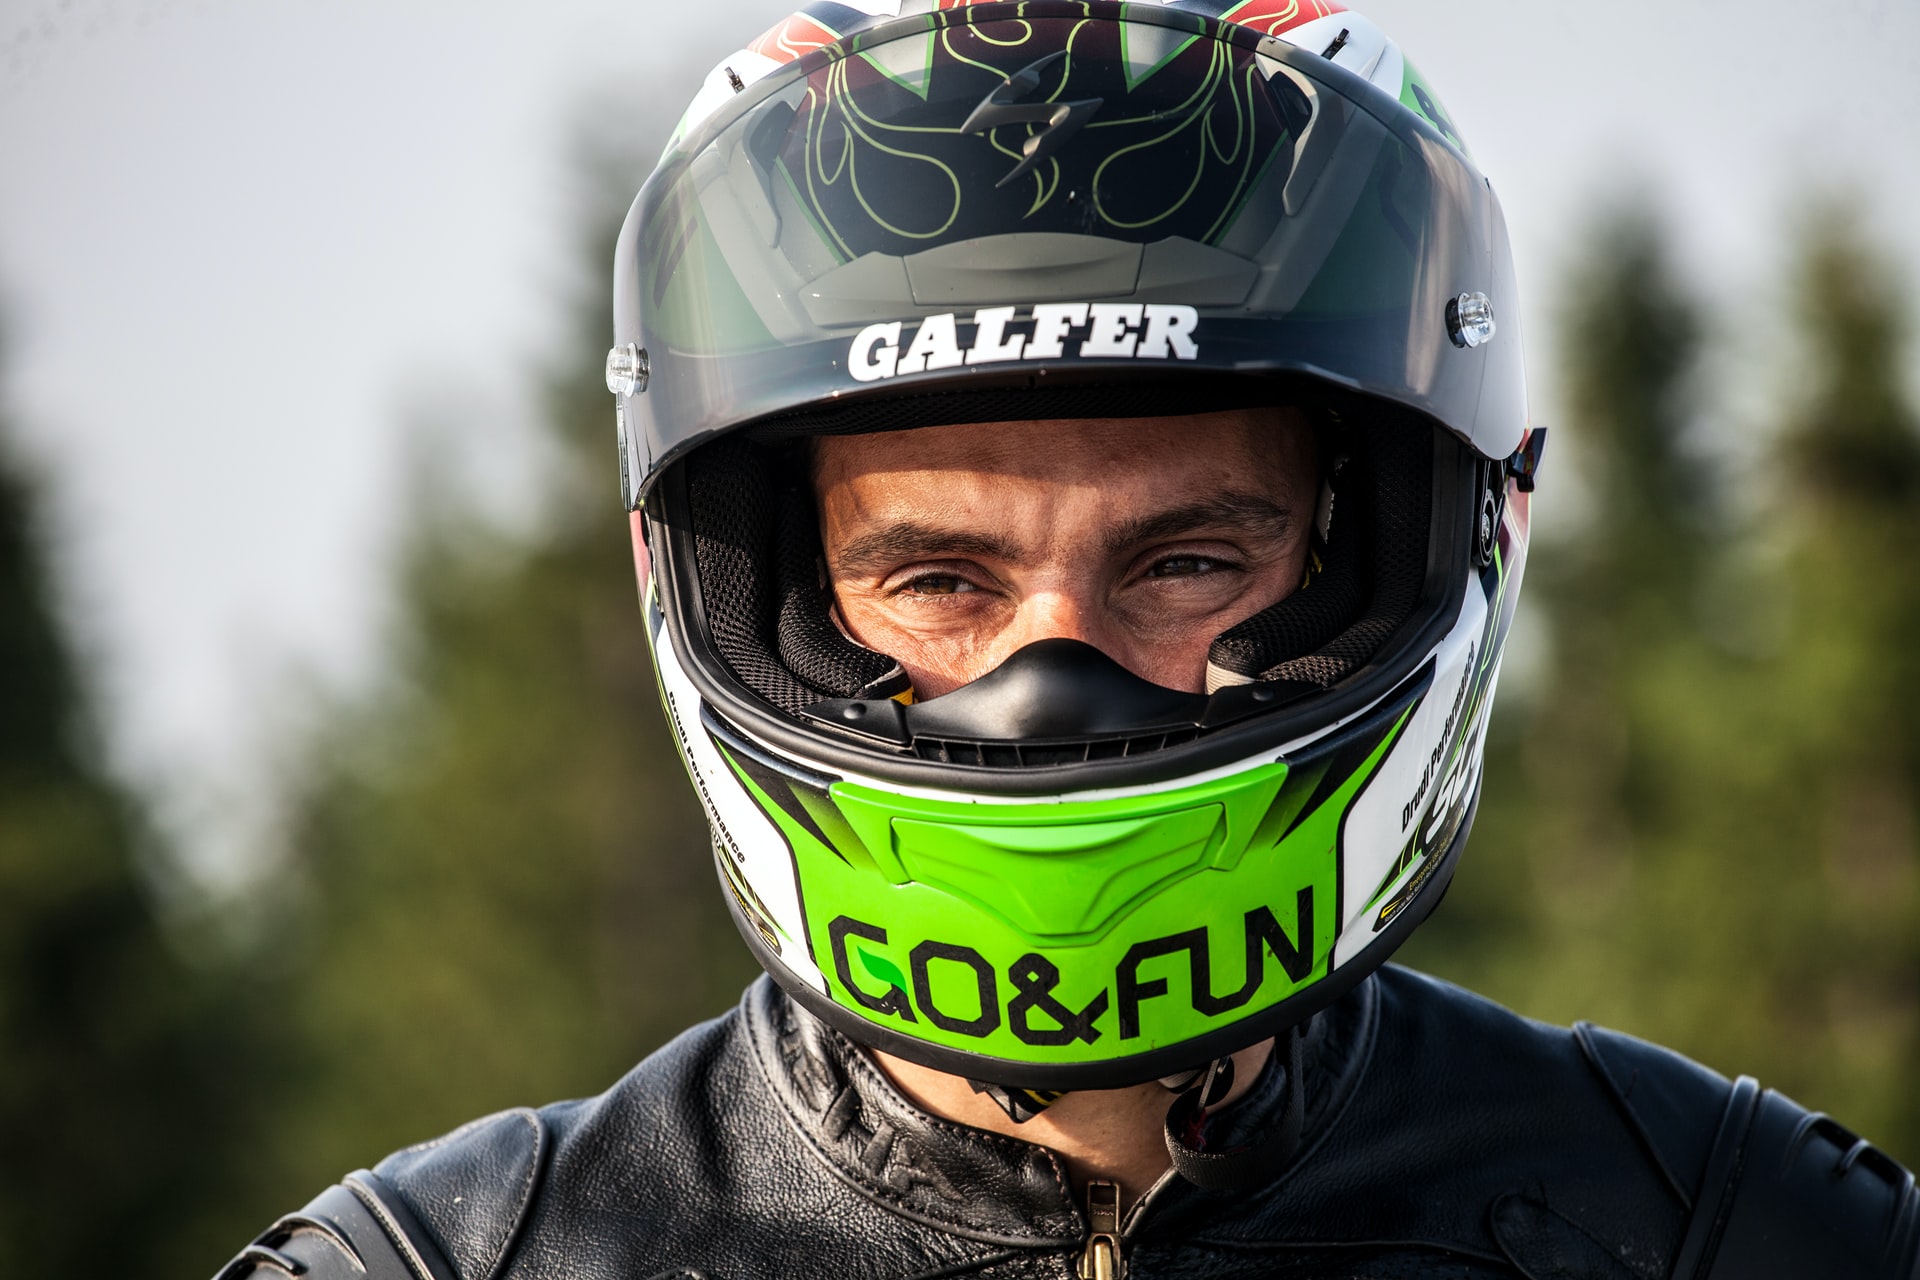 How to Mount Gopro to Motorcycle Helmet? - Detailed Guide & FAQs